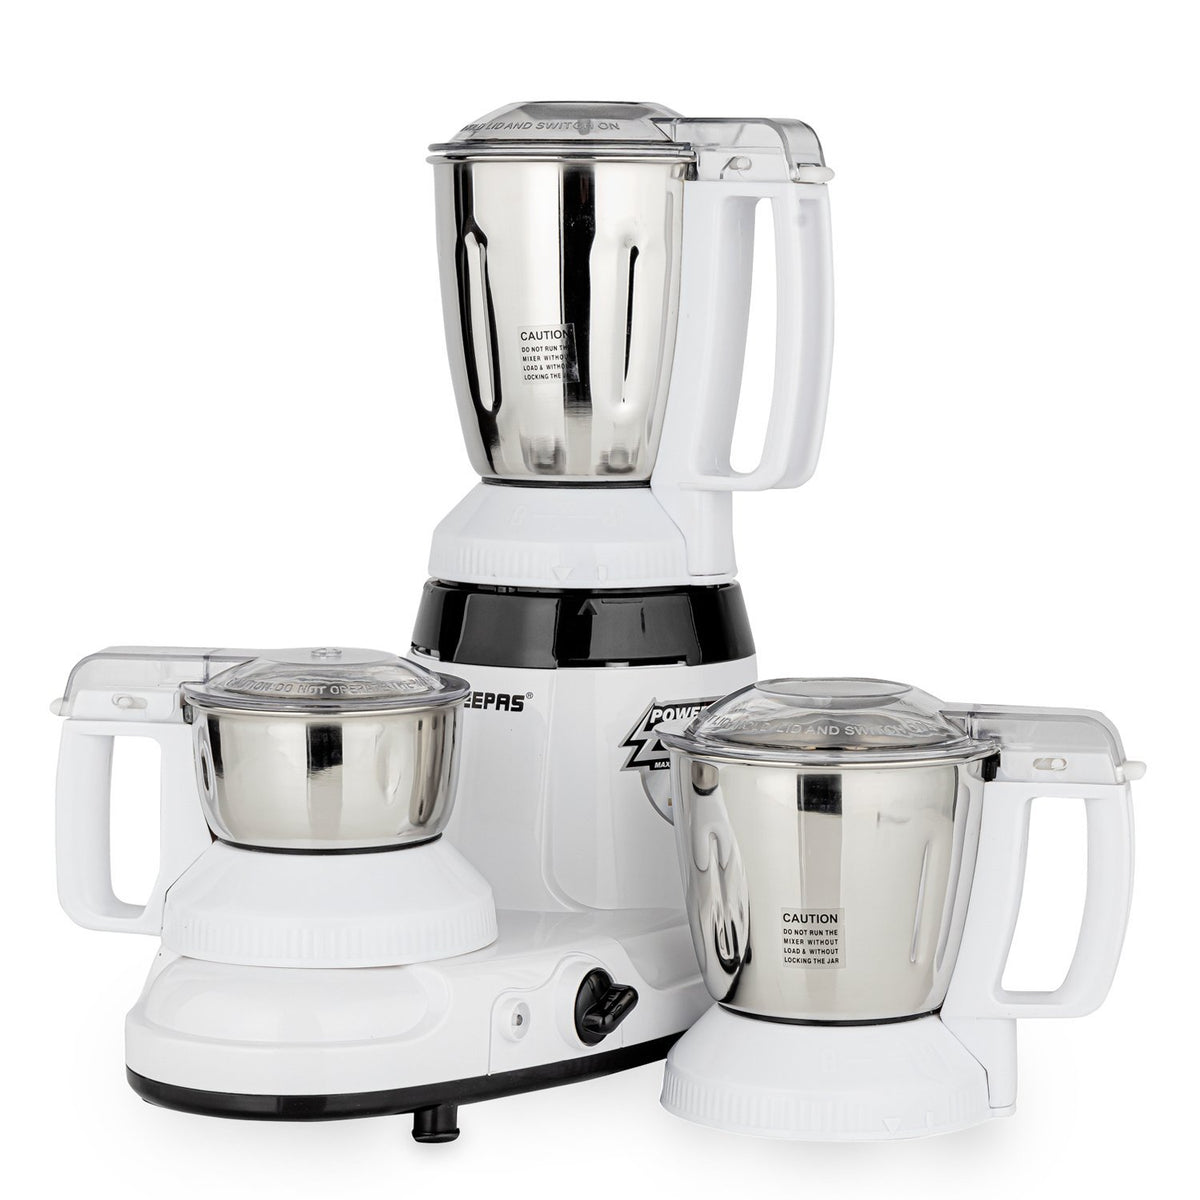 5-in-1 'Elegance' Wet and Dry Indian Mixer Grinder 1000W